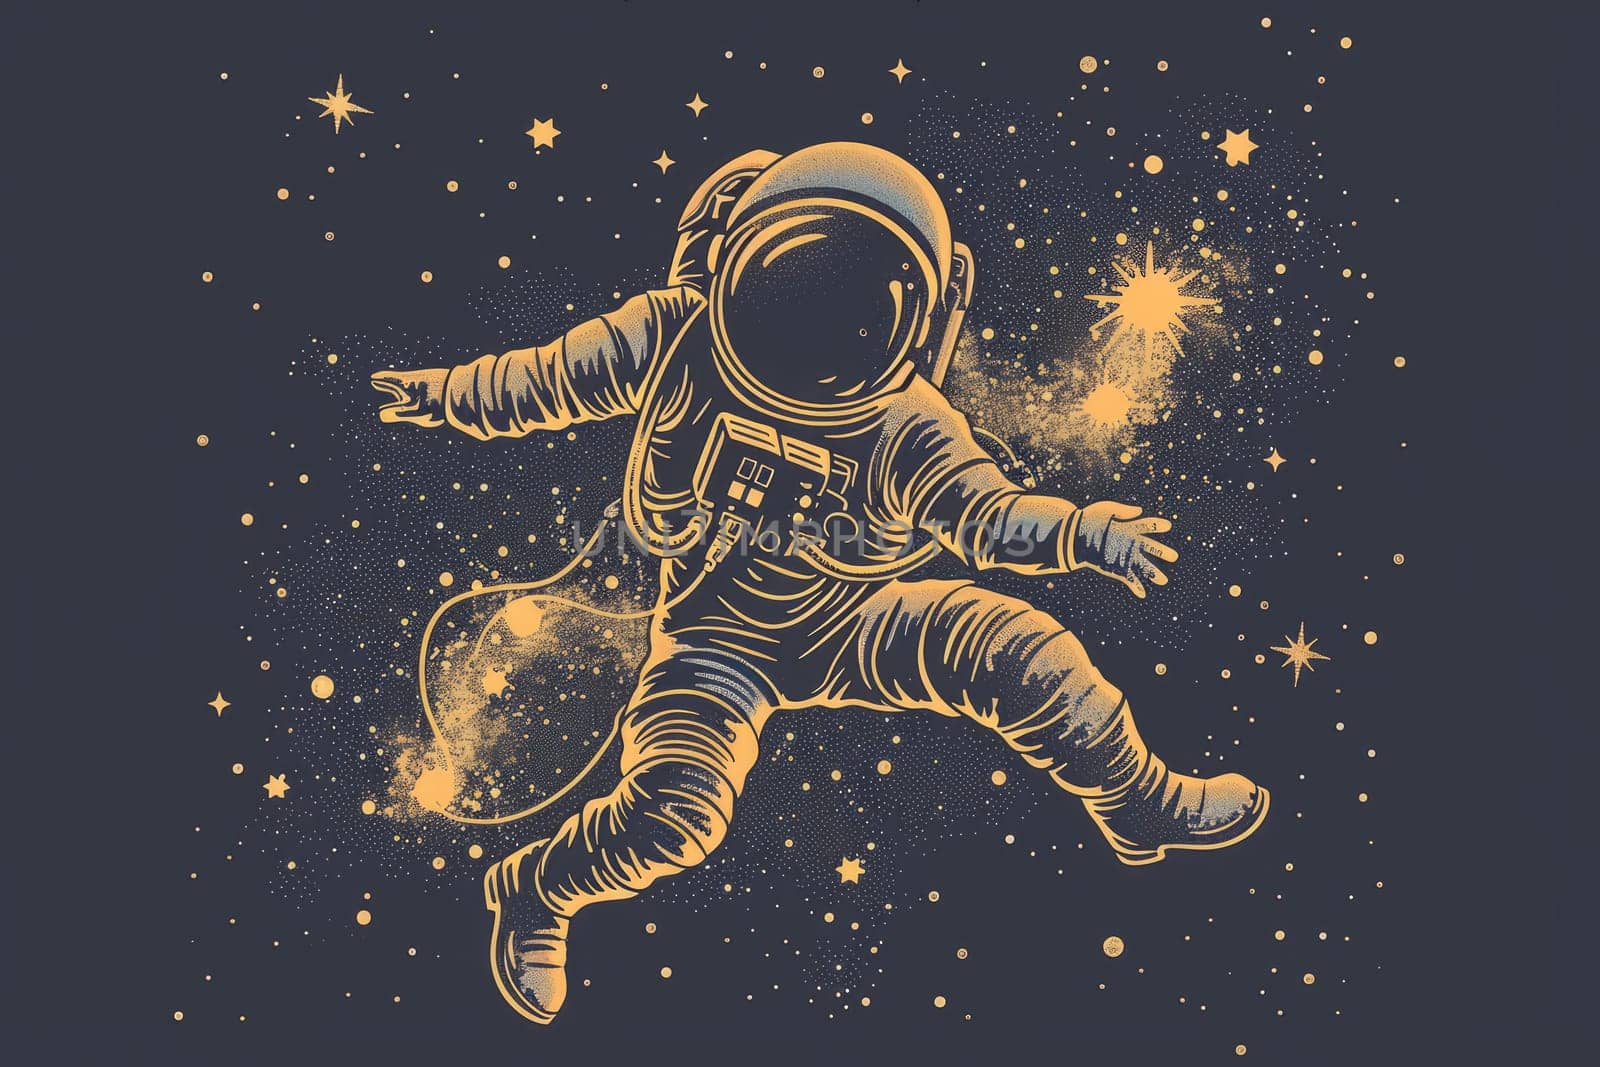 Astronaut Floating in Space with Stars and Planets